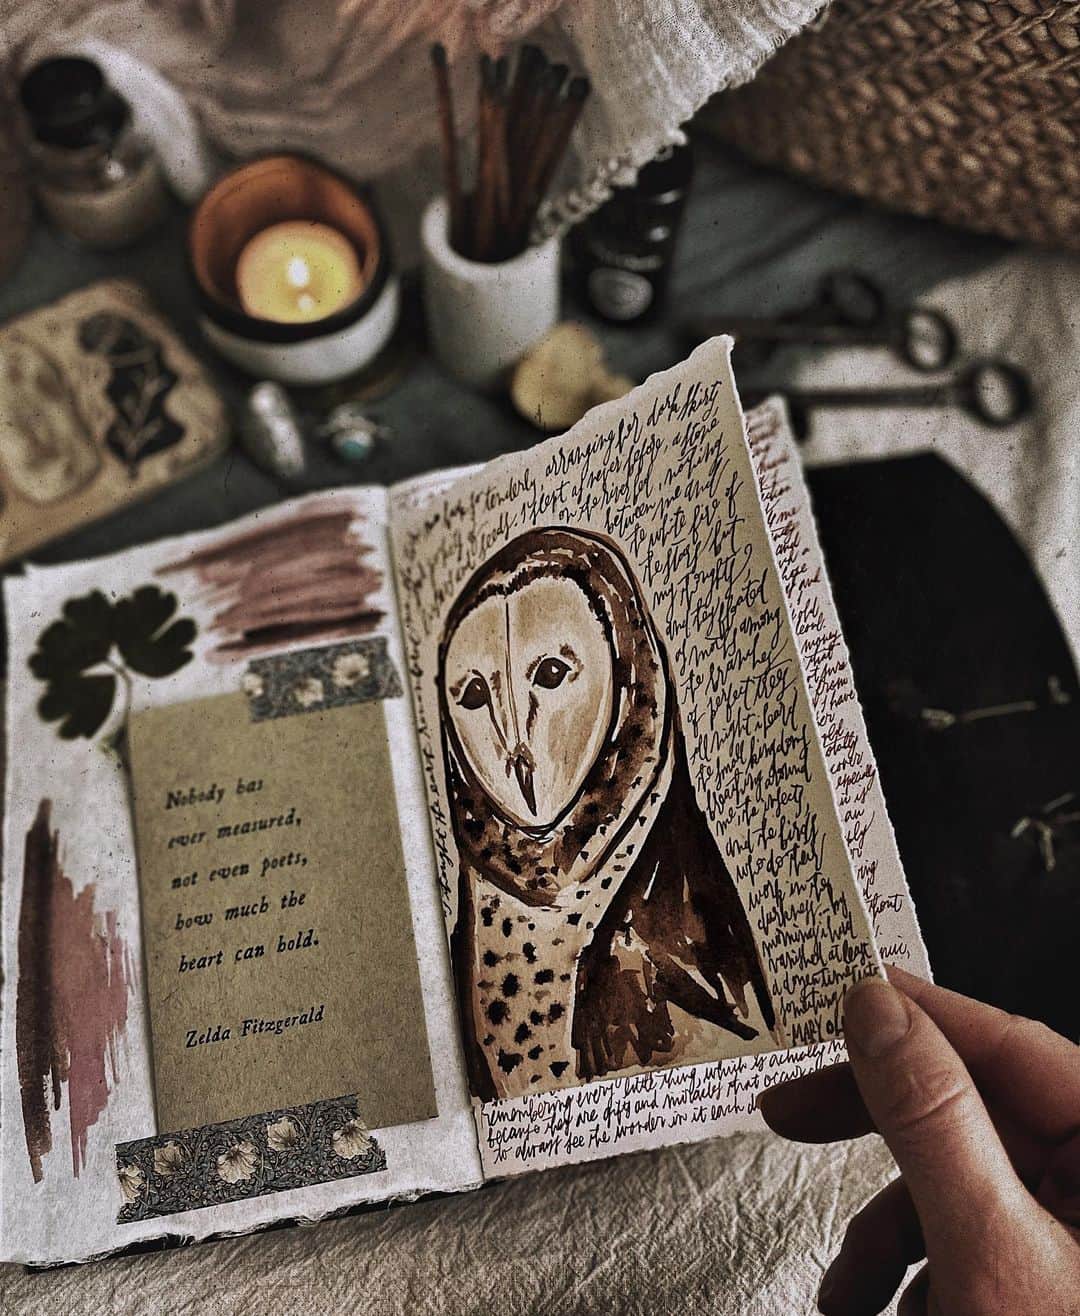 Catharine Mi-Sookさんのインスタグラム写真 - (Catharine Mi-SookInstagram)「My study in barn owls continues. I’m thoroughly enjoying this newness of brushstrokes. Thoughts have been much like rivers churning in currents though I’ve felt the need to retreat and channel them in the quiet offline spaces. The more pressed or pulled or nudged has become a cue to detour away into an expanse and take all the room I need. This has been such a wonderful gift. I’m exuberantly happy Friday has arrived and the weekend awaits with all sorts of possibility. My favorite is the sound of laughter echoing through rooms and the way the sunlight peers through certain windows. The sun feels extra warm in its hues today like an overarching golden hour thawing out ligaments while the soul stretches in its bask. I’m looking forward to books and baking and forts and imaginating. And of course scribbles and colors splayed throughout blank pages too. What are you looking forward to? . . . . Leather Journal with mixed paper @quillandarrow. Sailor Pro Gear Mini @yoseka.stationery. 1901 Pencil with Sterling Silver Extender @franklinchristoph. . Ceramic Paint Palette @pitchpinepottery. Watercolors @caseformaking. Candles @natureskindle. Turquoise Rings @saltandsummitjewelry. Alpha Luna Ring @foxand.thefawn. . . . . “I thought the earth remembered me, she took me back so tenderly, arranging her dark skirts, her pockets full of lichens and seeds. I slept as never before, a stone on the river bed, nothing between me and the white fire of the stars but my thoughts, and they floated light as moths among the branches of the perfect trees. All night I heard the small kingdoms breathing around me, the insects, and the birds who do their work in the darkness... By morning I had vanished at least a dozen times into something better.” -Mary Oliver . . . . #artjournaling #journaling #memoirs #barnowl #watercolorsketch #junkjournal #quillandarrow #bookbinding #handmadejournal #franklinchristoph #pencilholder #sailorpen #sailorprogearmini #fountainpen #pitchpinepottery #mypitchpine #ceramicpalette #caseformaking #watercolorpractice #booksandcandles #ofsimplethings #darkacademiaaesthetic #inspireddaily #poetryofsimplethings #morningpages #thesweetlifeunscripted #gatheredstyle」2月6日 4時02分 - catharinemisook